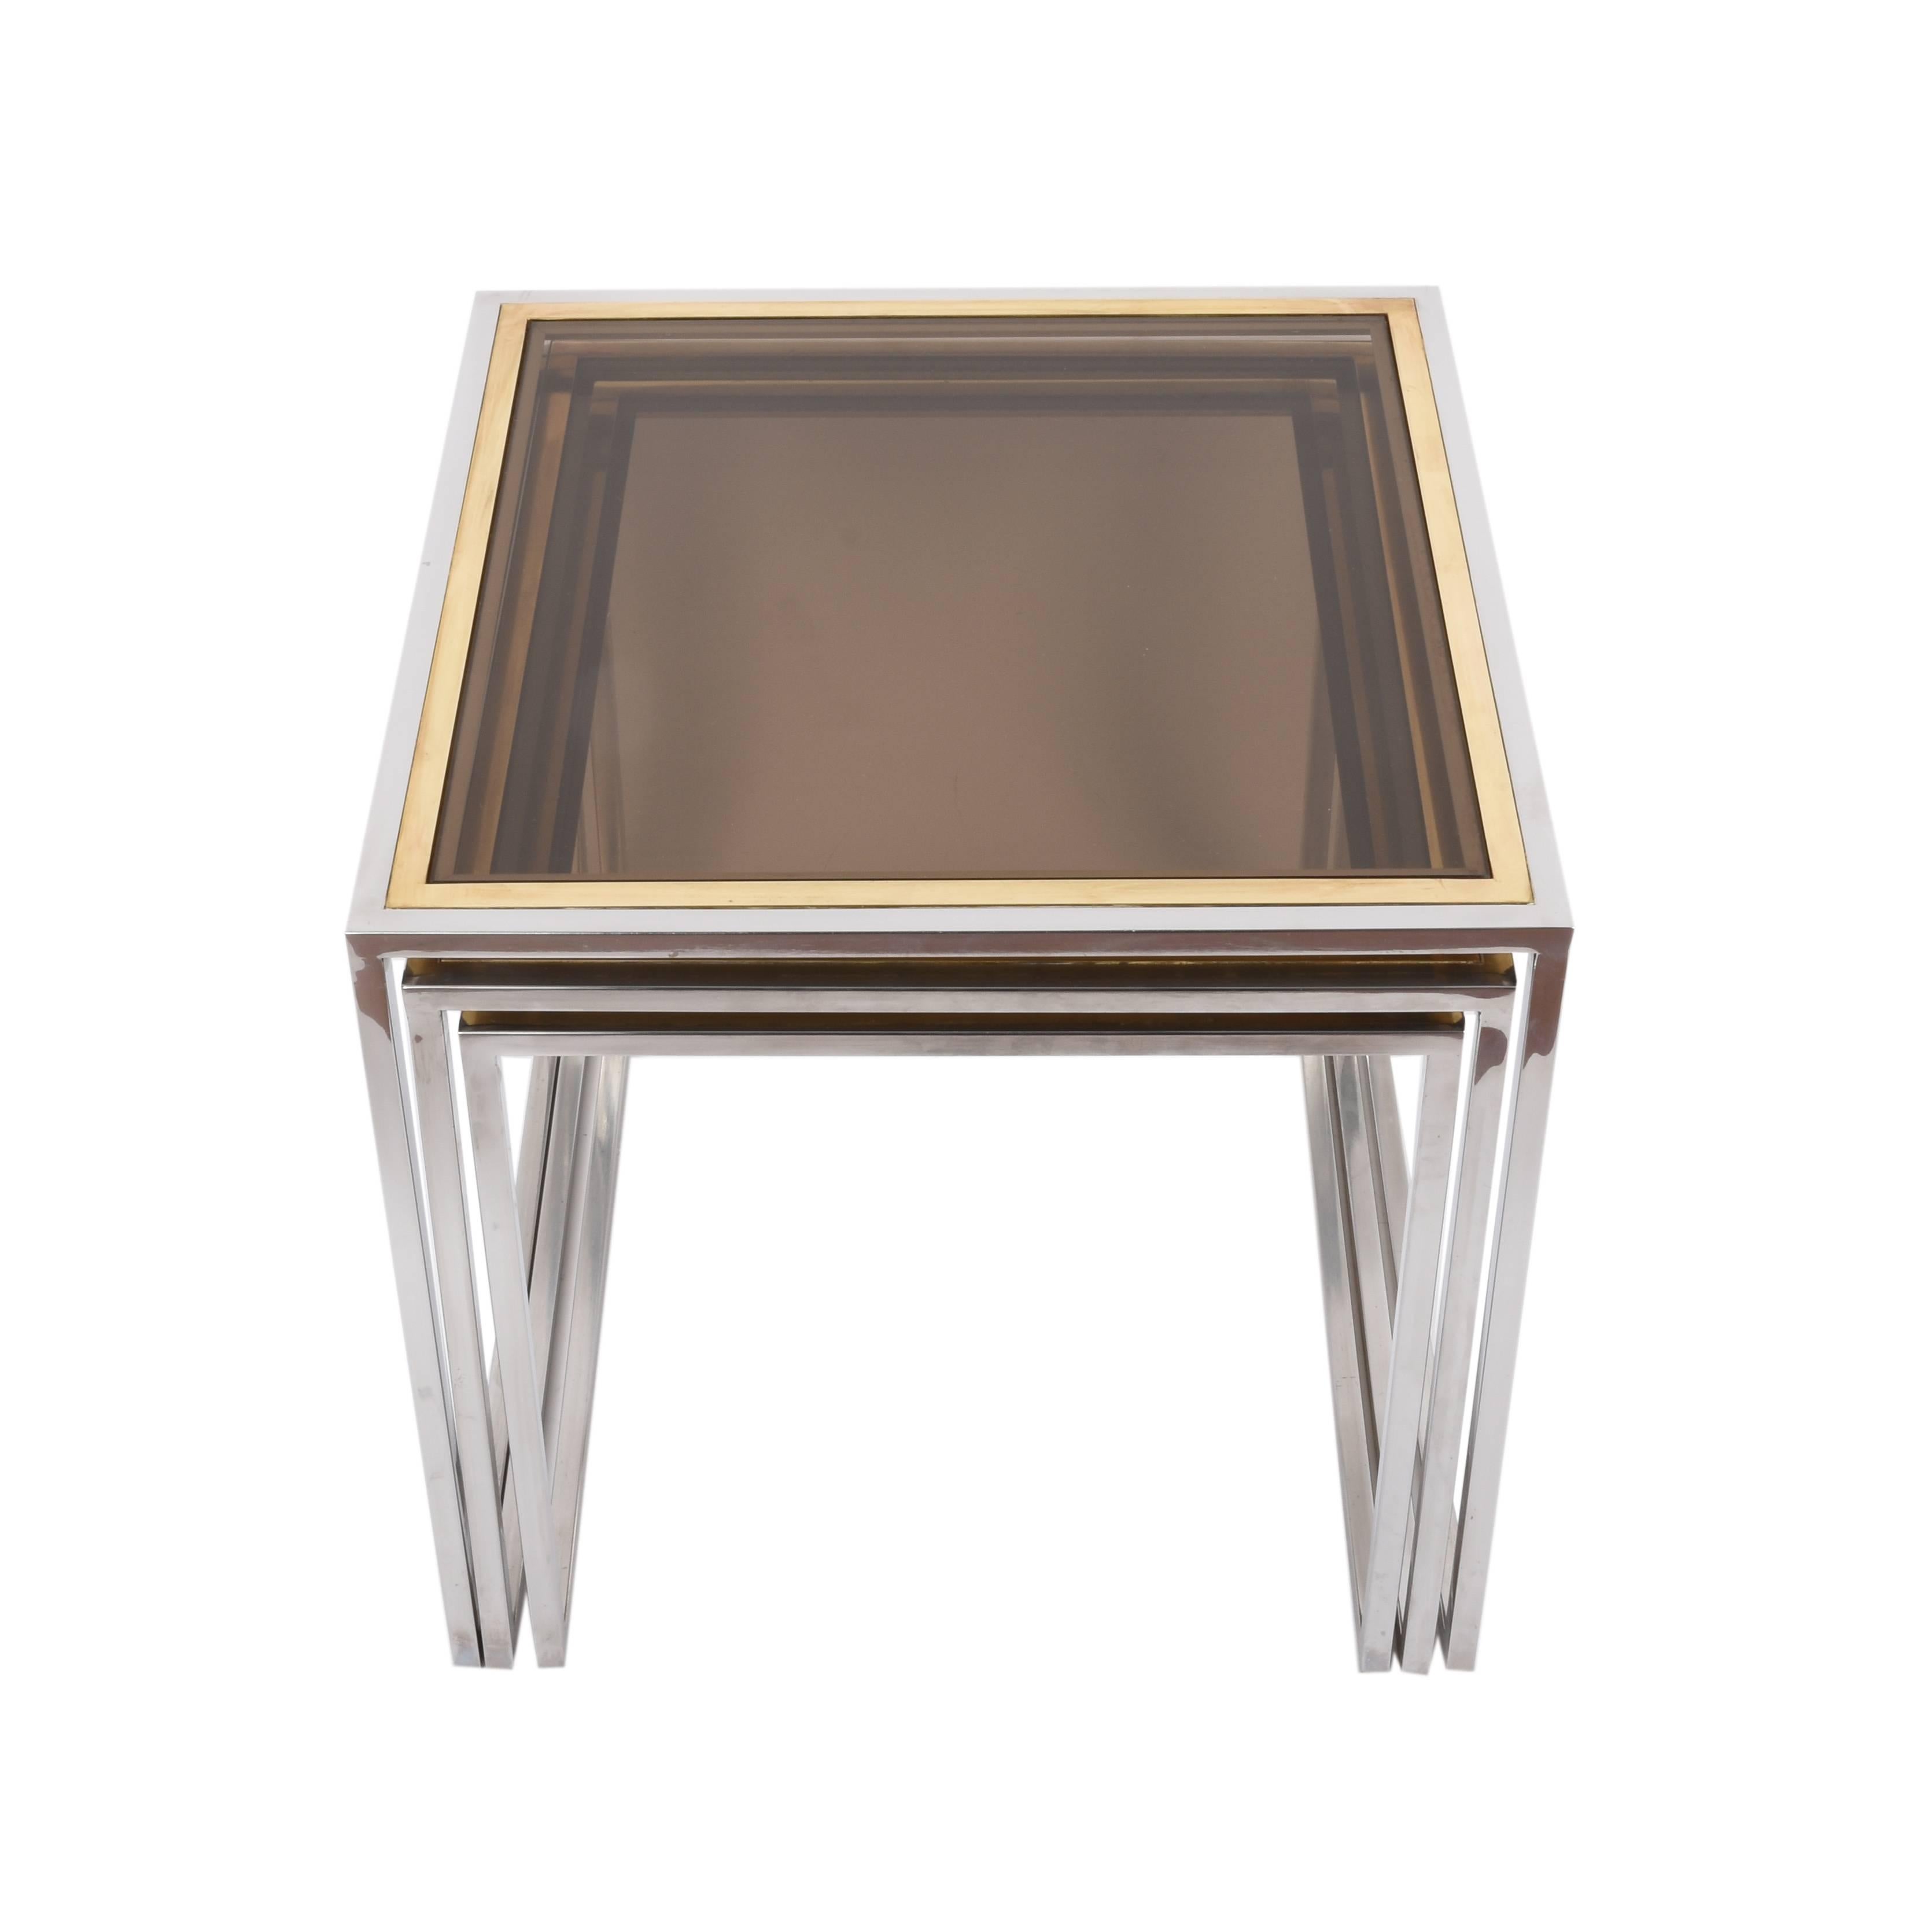 Chrome and Brass Nesting Italian Coffee Tables with Smoked Glass Top, 1970s For Sale 2